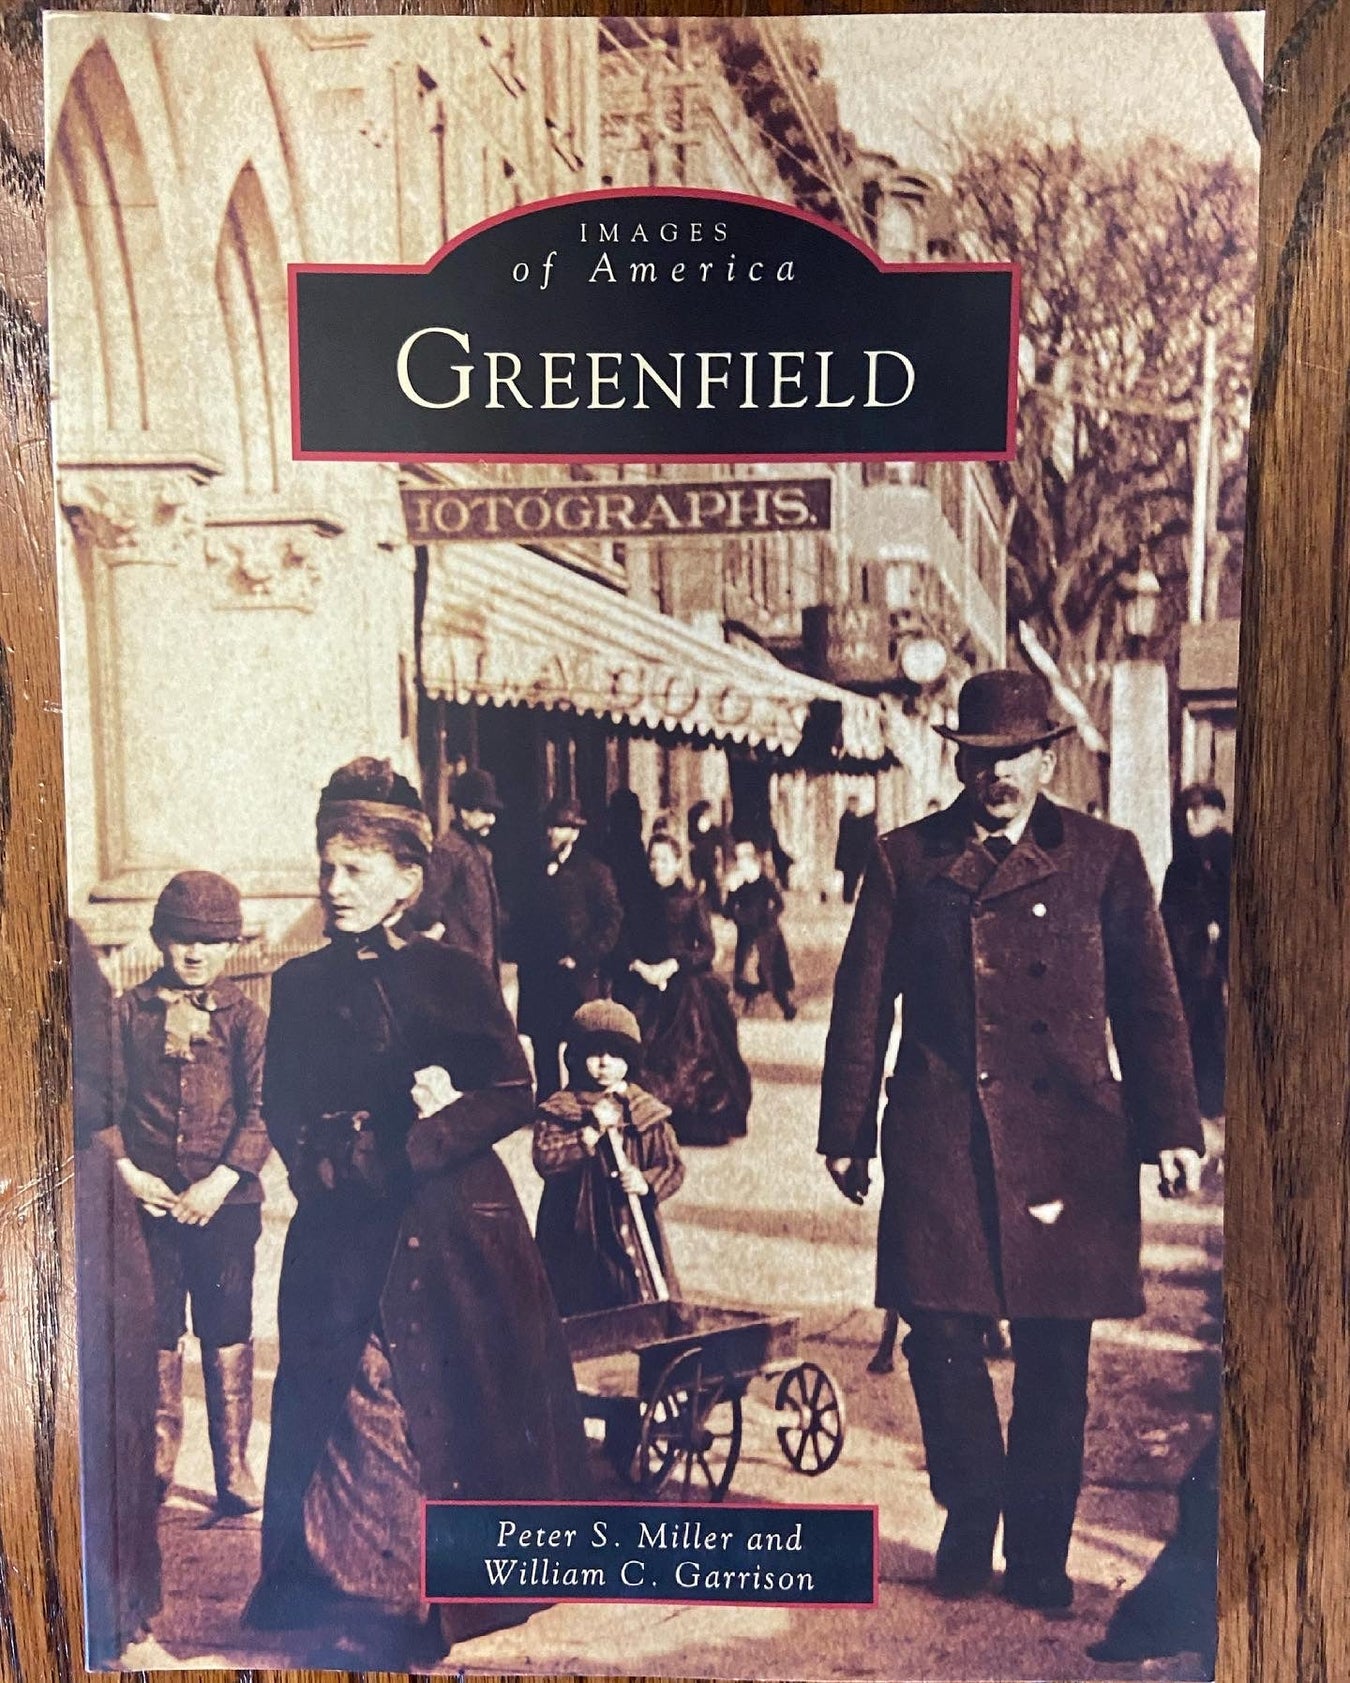 the book Greenfield by Peter S. Miller